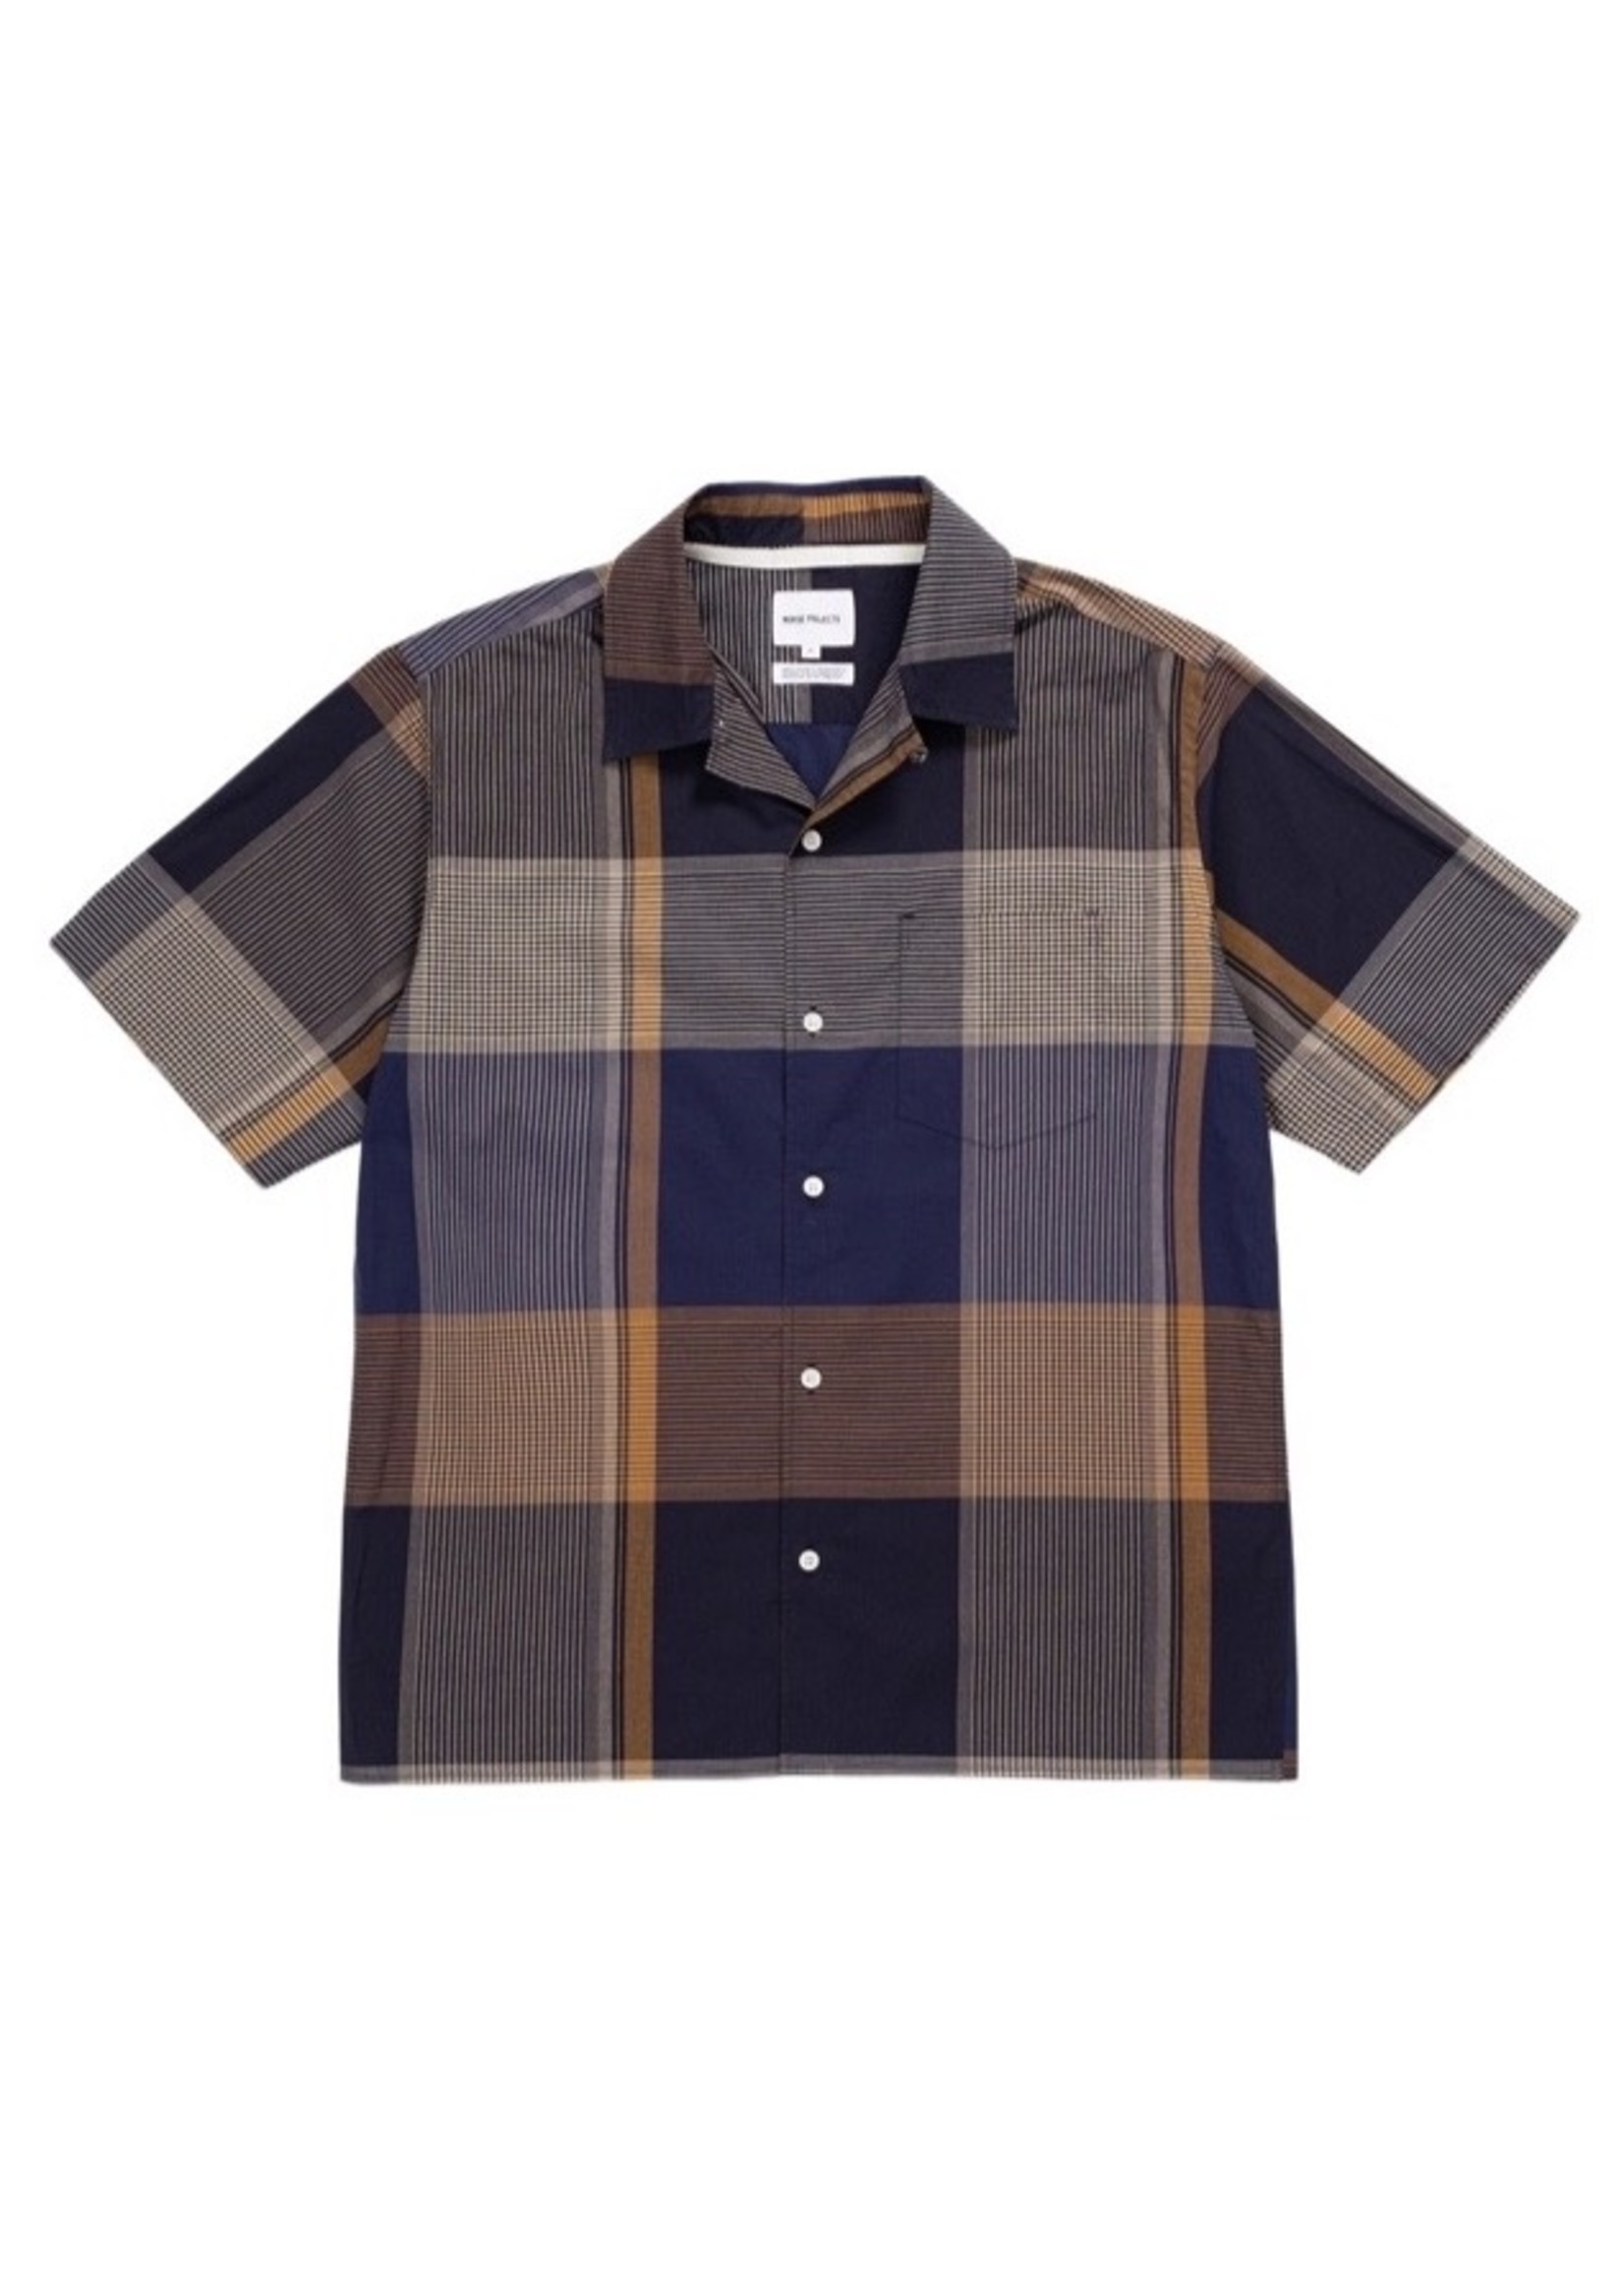 NORSE PROJECTS CARSTEN LIGHT CHECK SHIRT